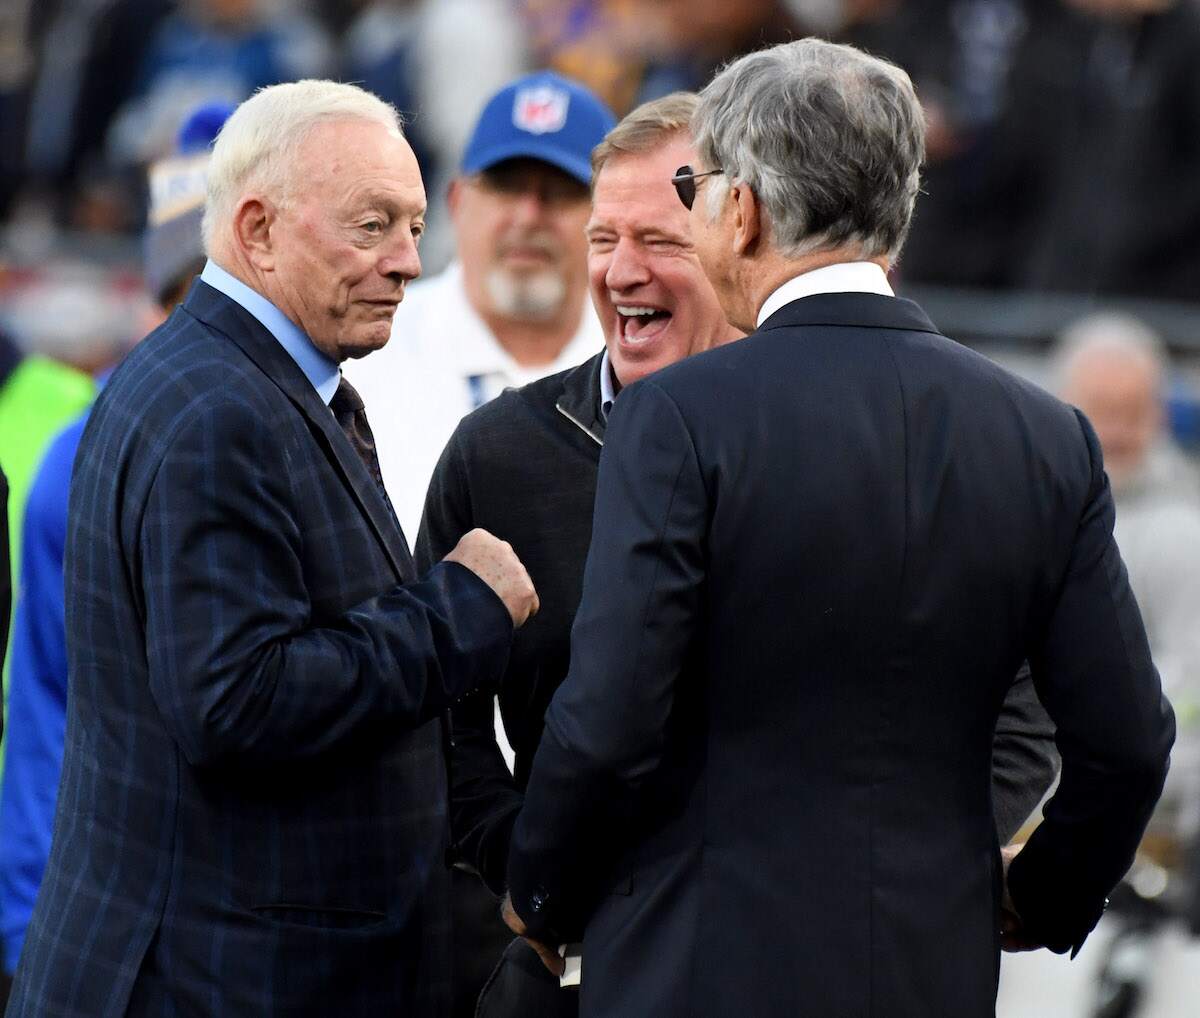 Dallas Cowboys owner Jerry Jones laughs with Los Angeles Rams owner Stan Kronke and NFL Commissioner Roger Goodell prior to an NFL playoff football game